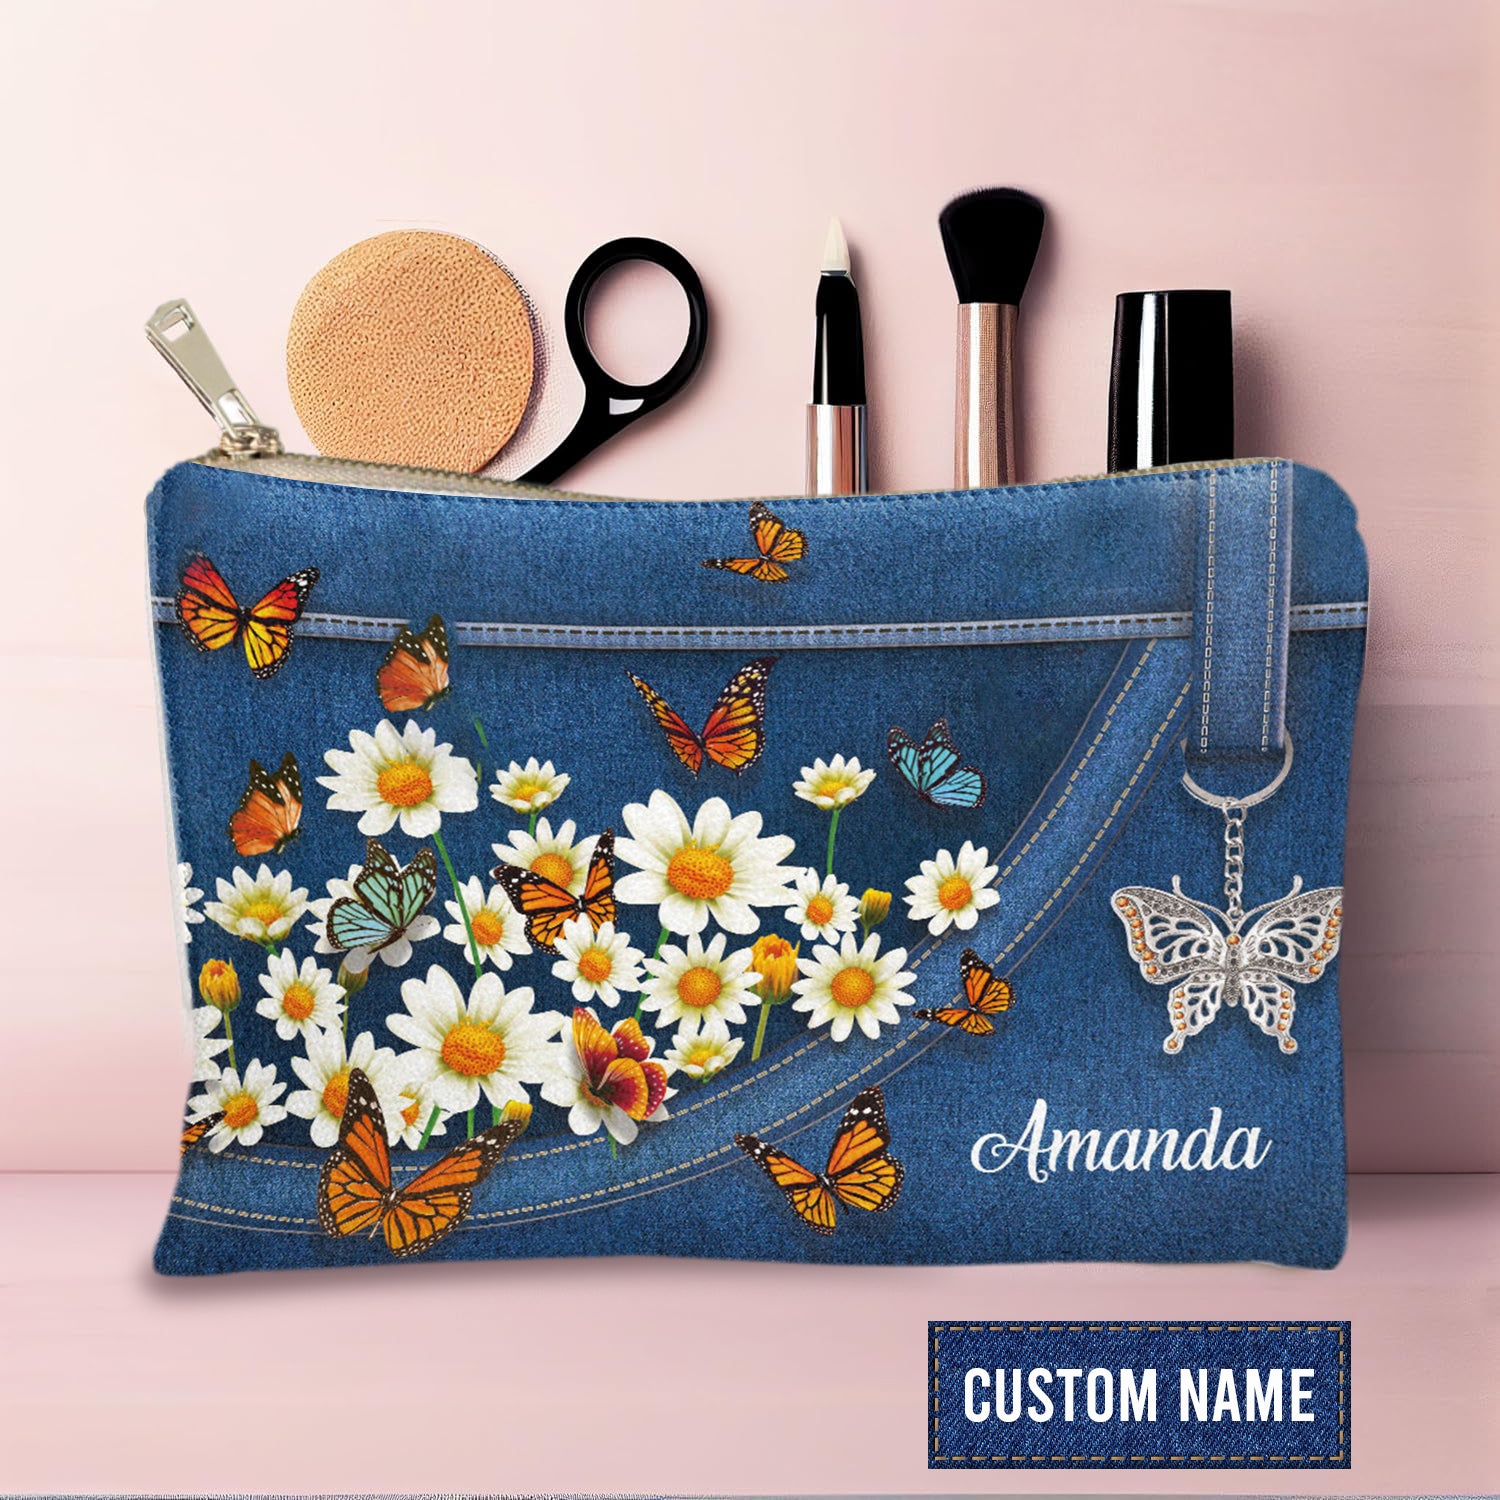 Lovely Daisy And Butterfly Personalized Cosmetic Bag Gifts For Women Birthday Mothers Day Gifts For Mom Sister Friend Friendship